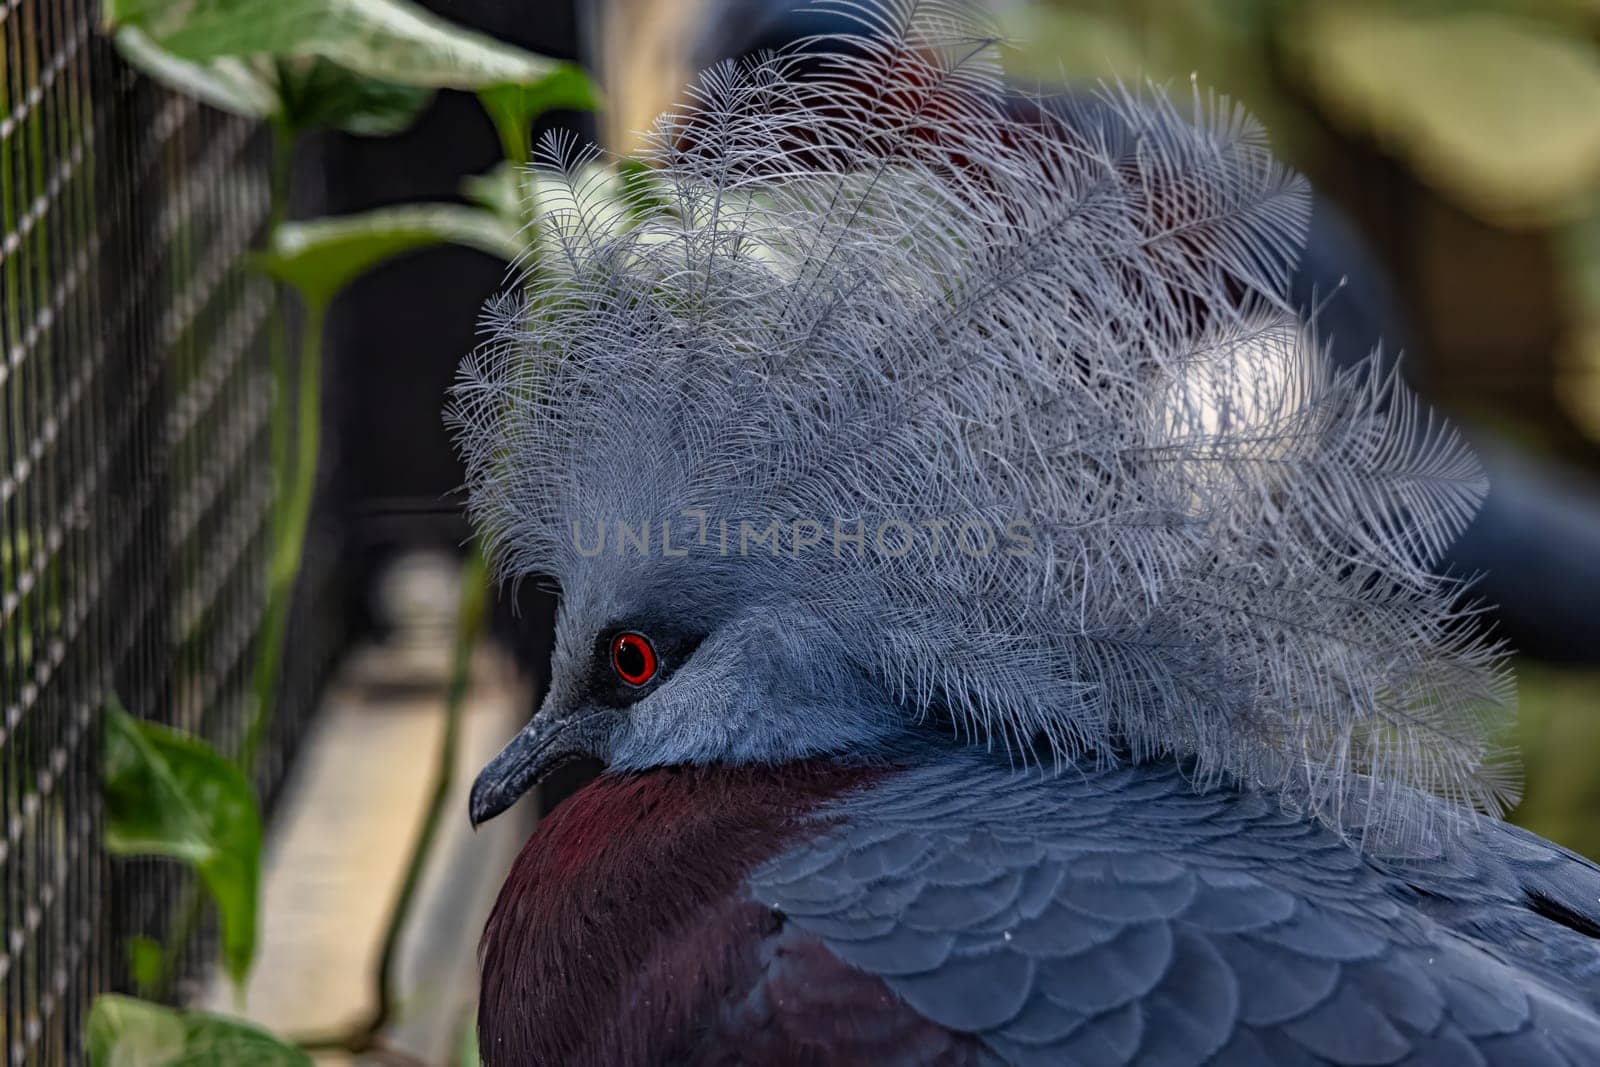 A close-up view of a Western Crowned Pigeon showcasing its intricate feather details and vibrant red eyes.